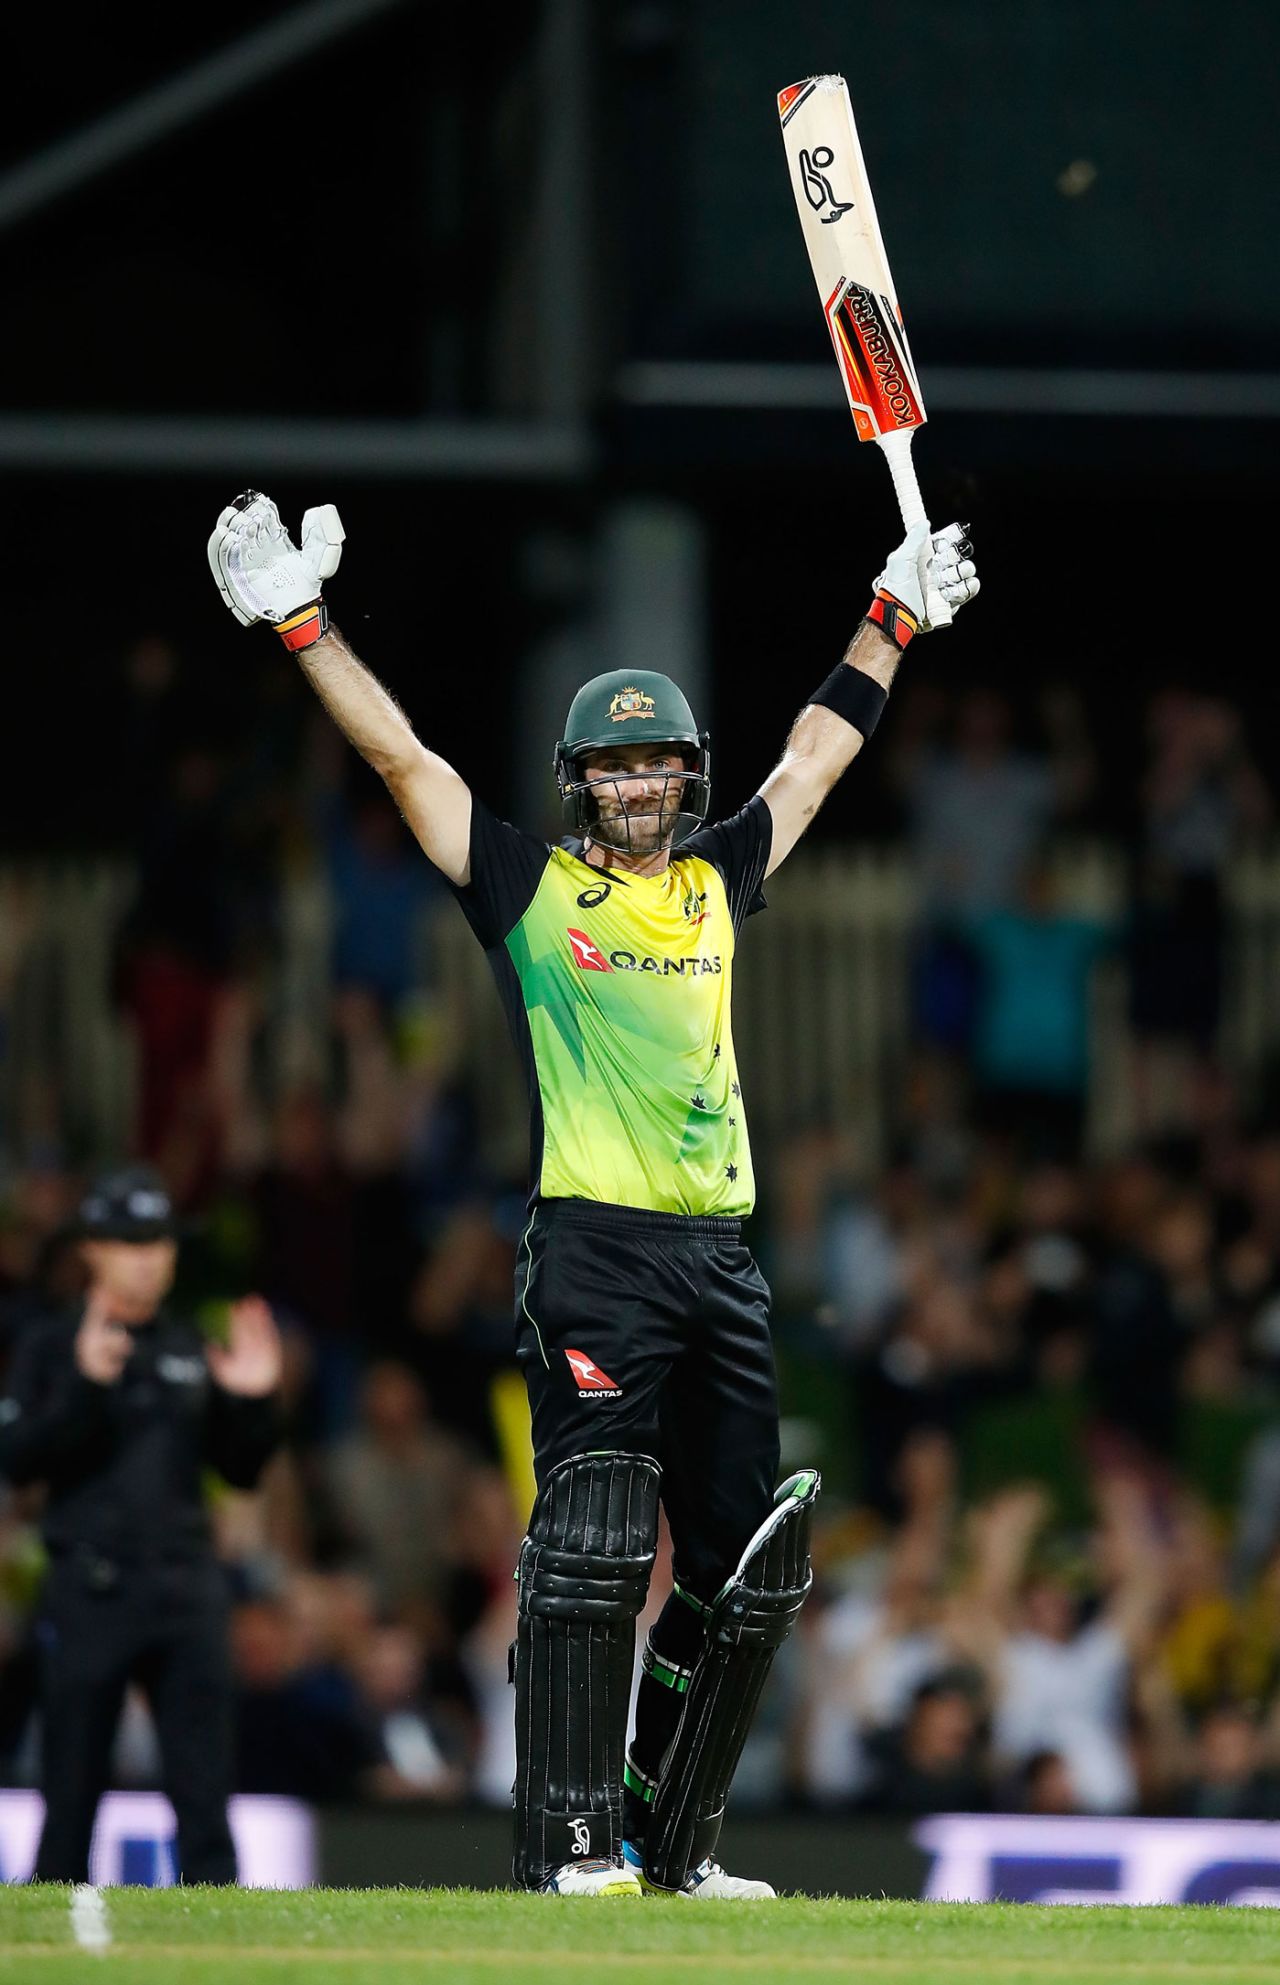 Glenn Maxwell brought up his hundred with a six that also sealed victory, Australia v England, 2nd match, T20 Tri-Series, Hobart, February 7, 2018